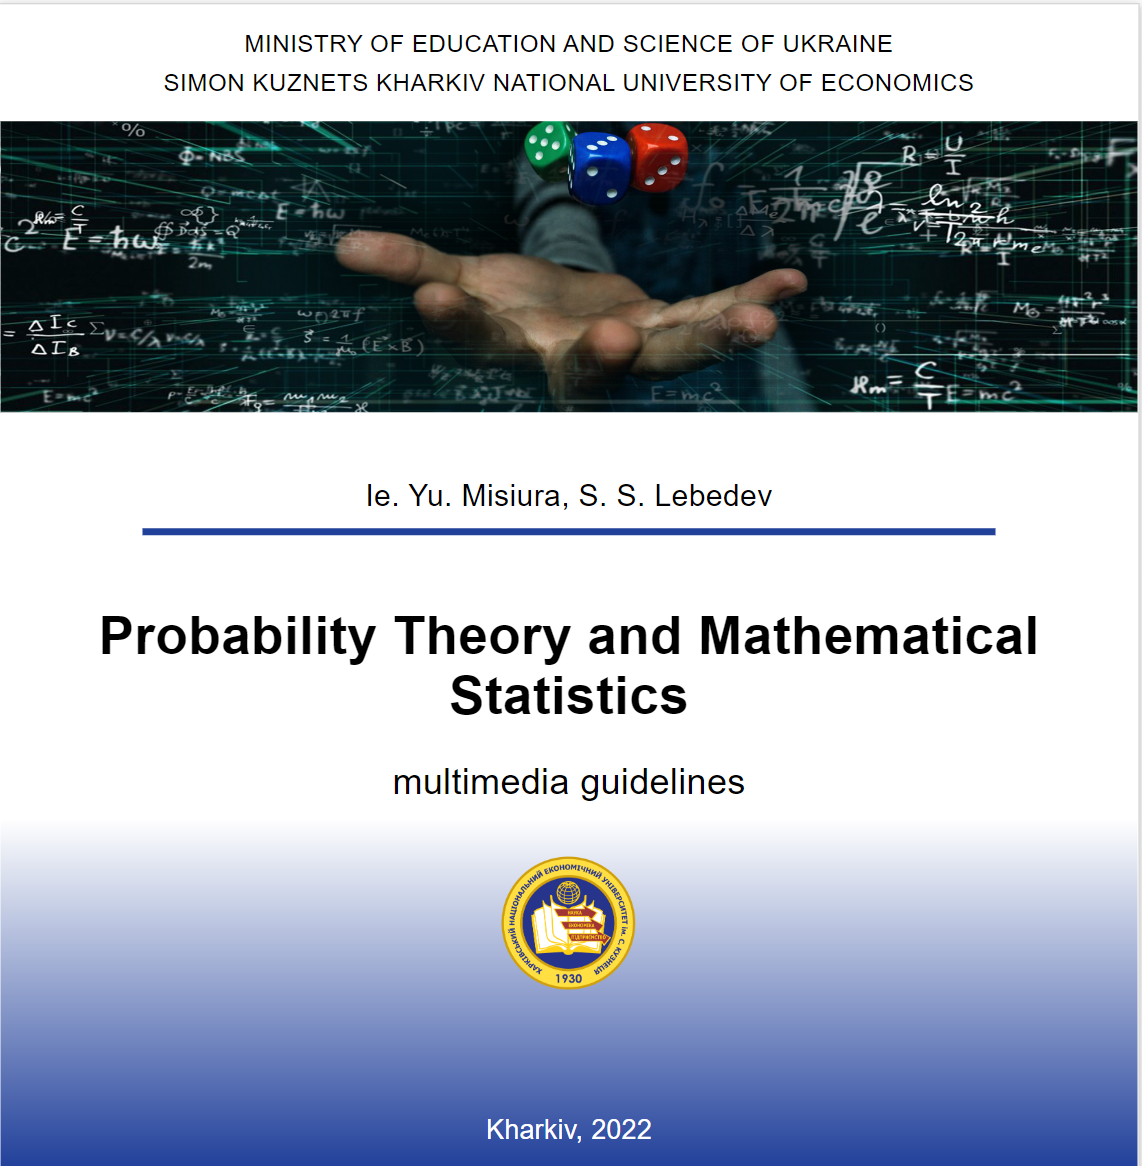 Probability Theory and Mathematical Statistics : multimedia guidelines to independent work for Bachelor’s (first) degree students of all specialties